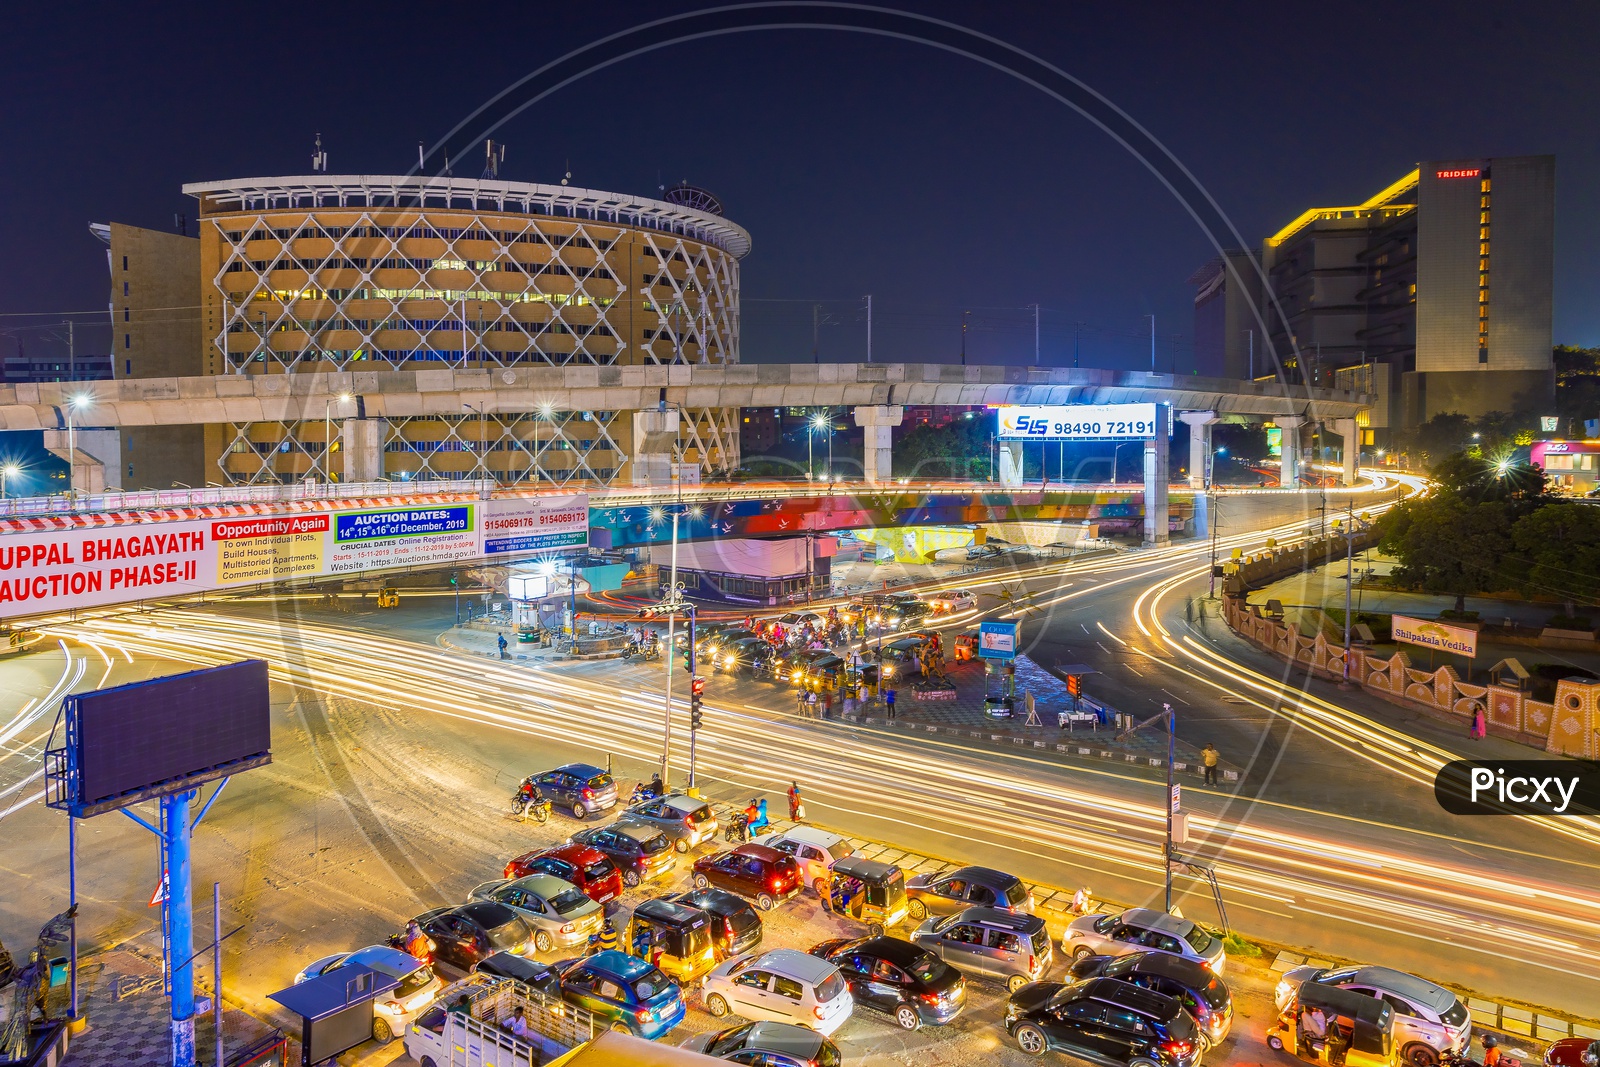 Long Exposure Shot Of Hi-tech City Traffic Signal With Cyber towers in Background